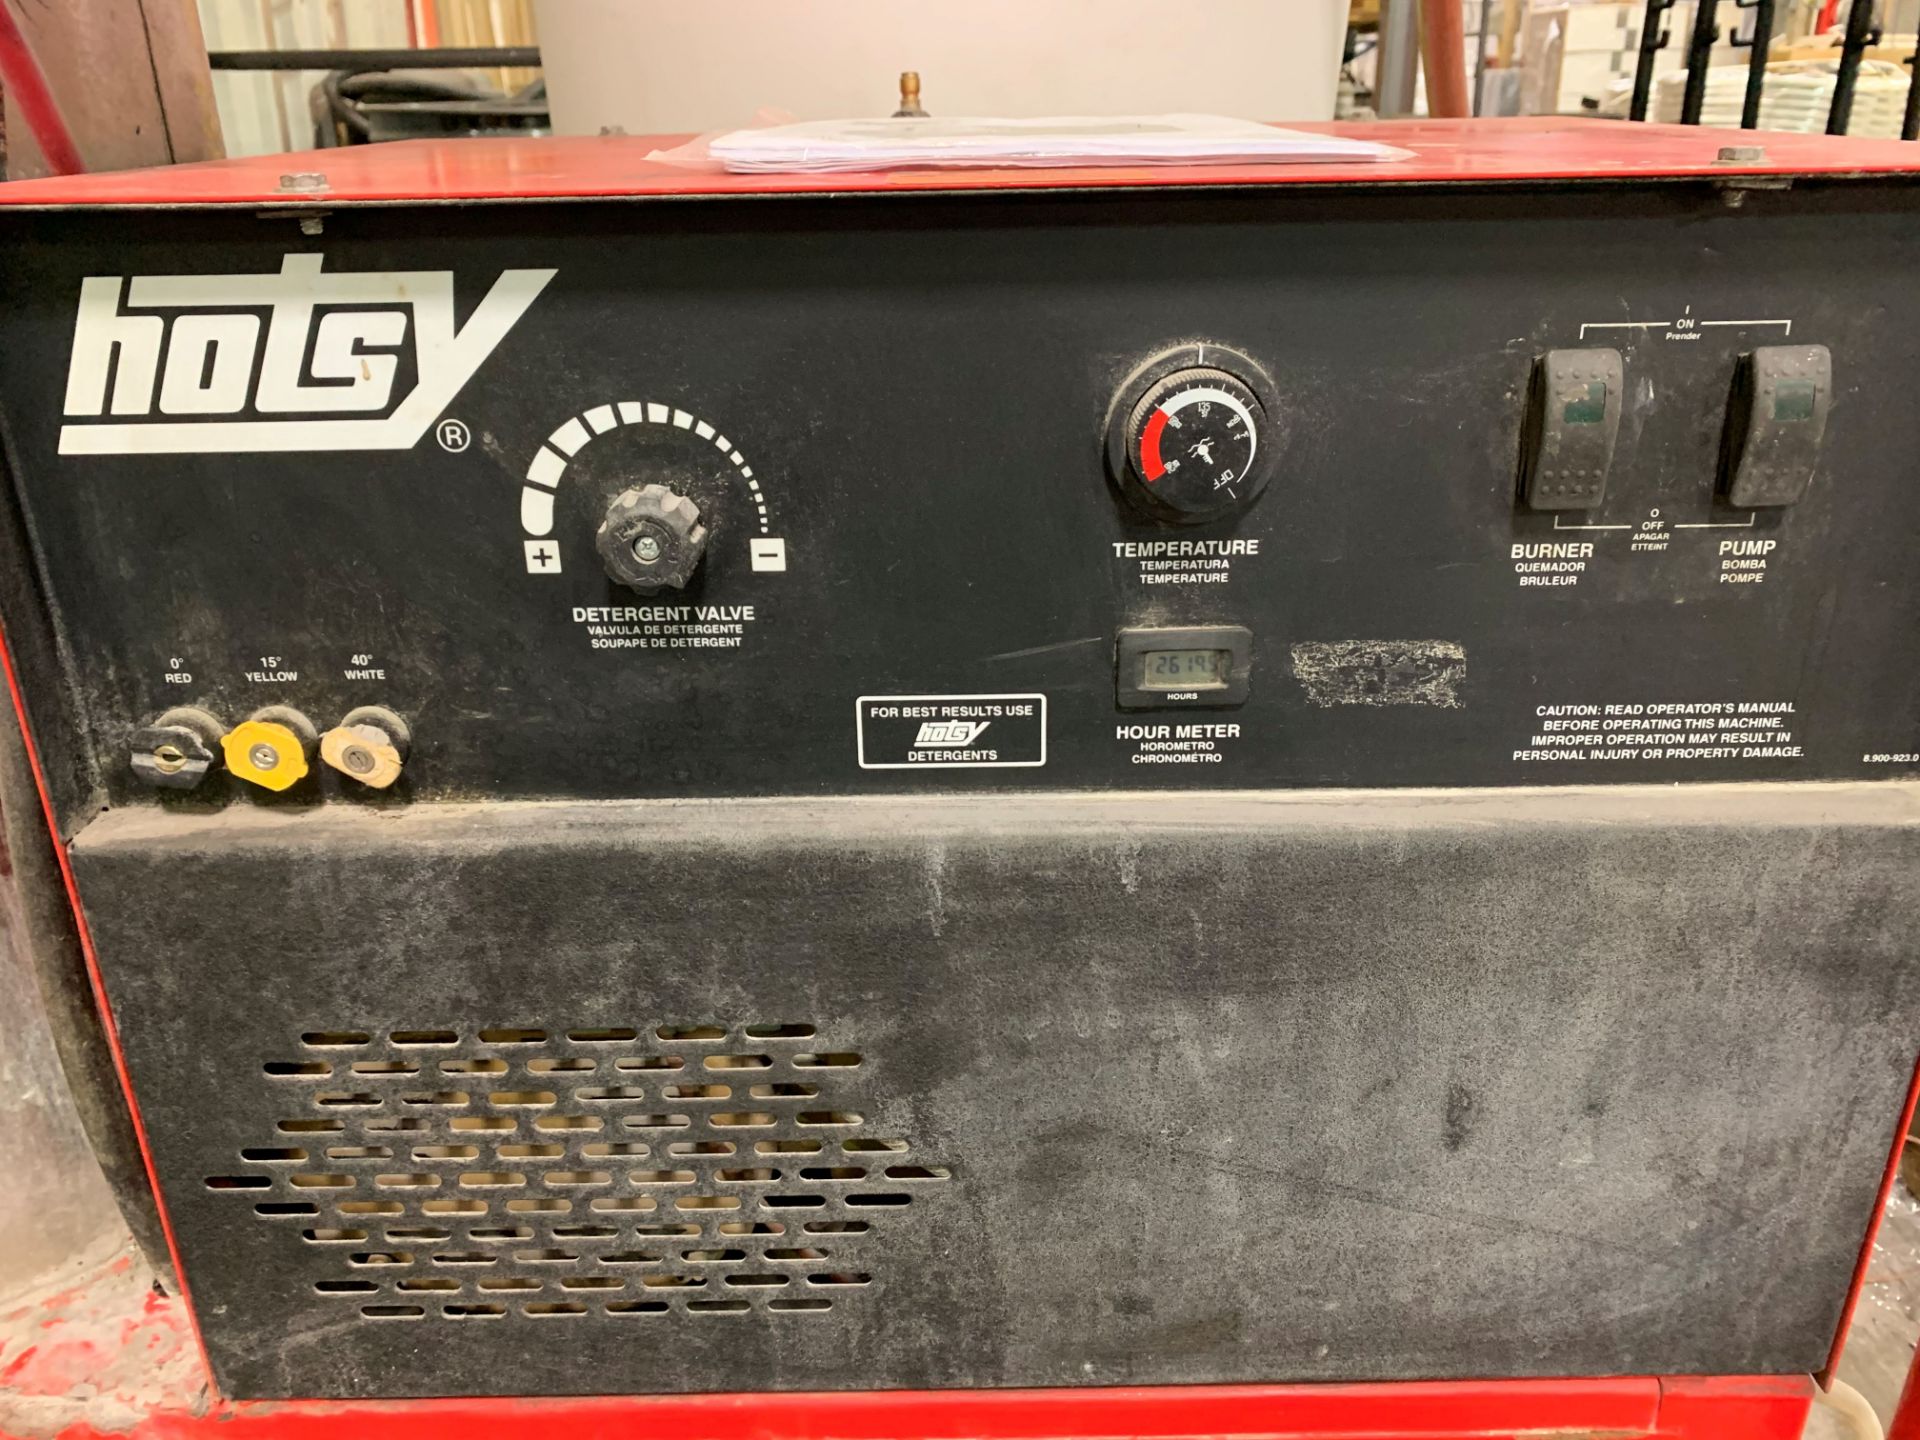 2,000 PSI Hotsy Model 995SS Steam Cleaner - Loading Fee Due the "ERRA" Adkins Machinery $150.00 - Image 3 of 3